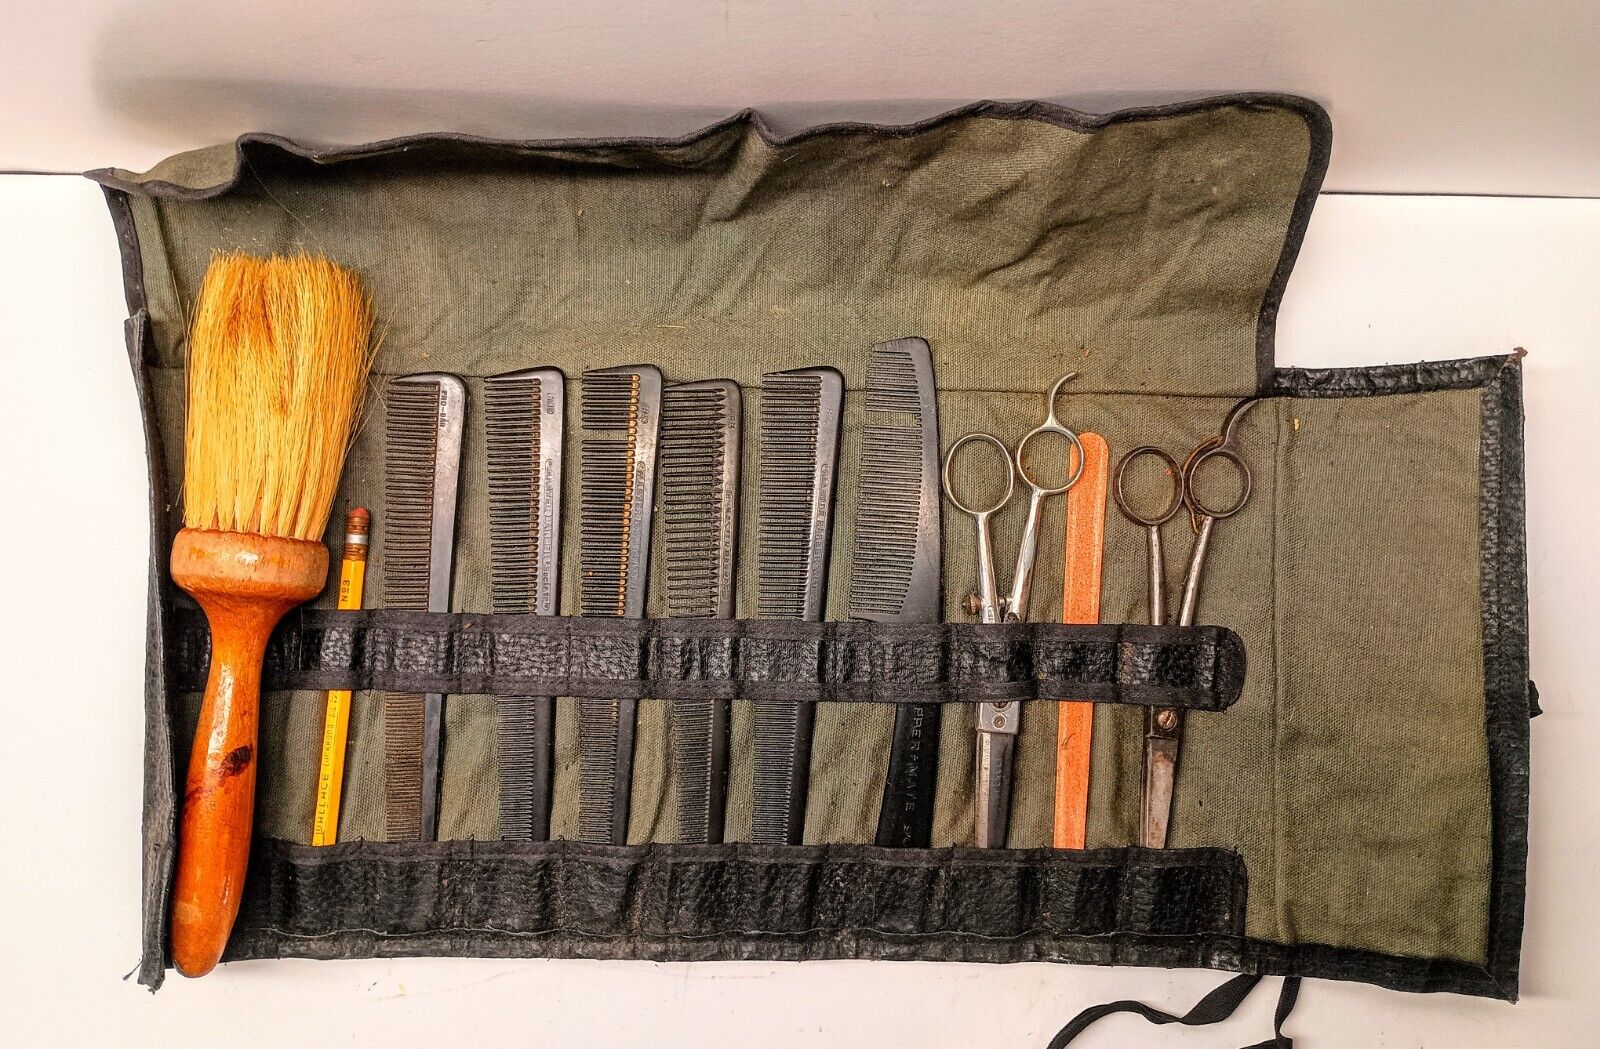 Barbers Tools VINTAGE Supercut 22, Genovese Scissors, Combs, Brush and Pouch